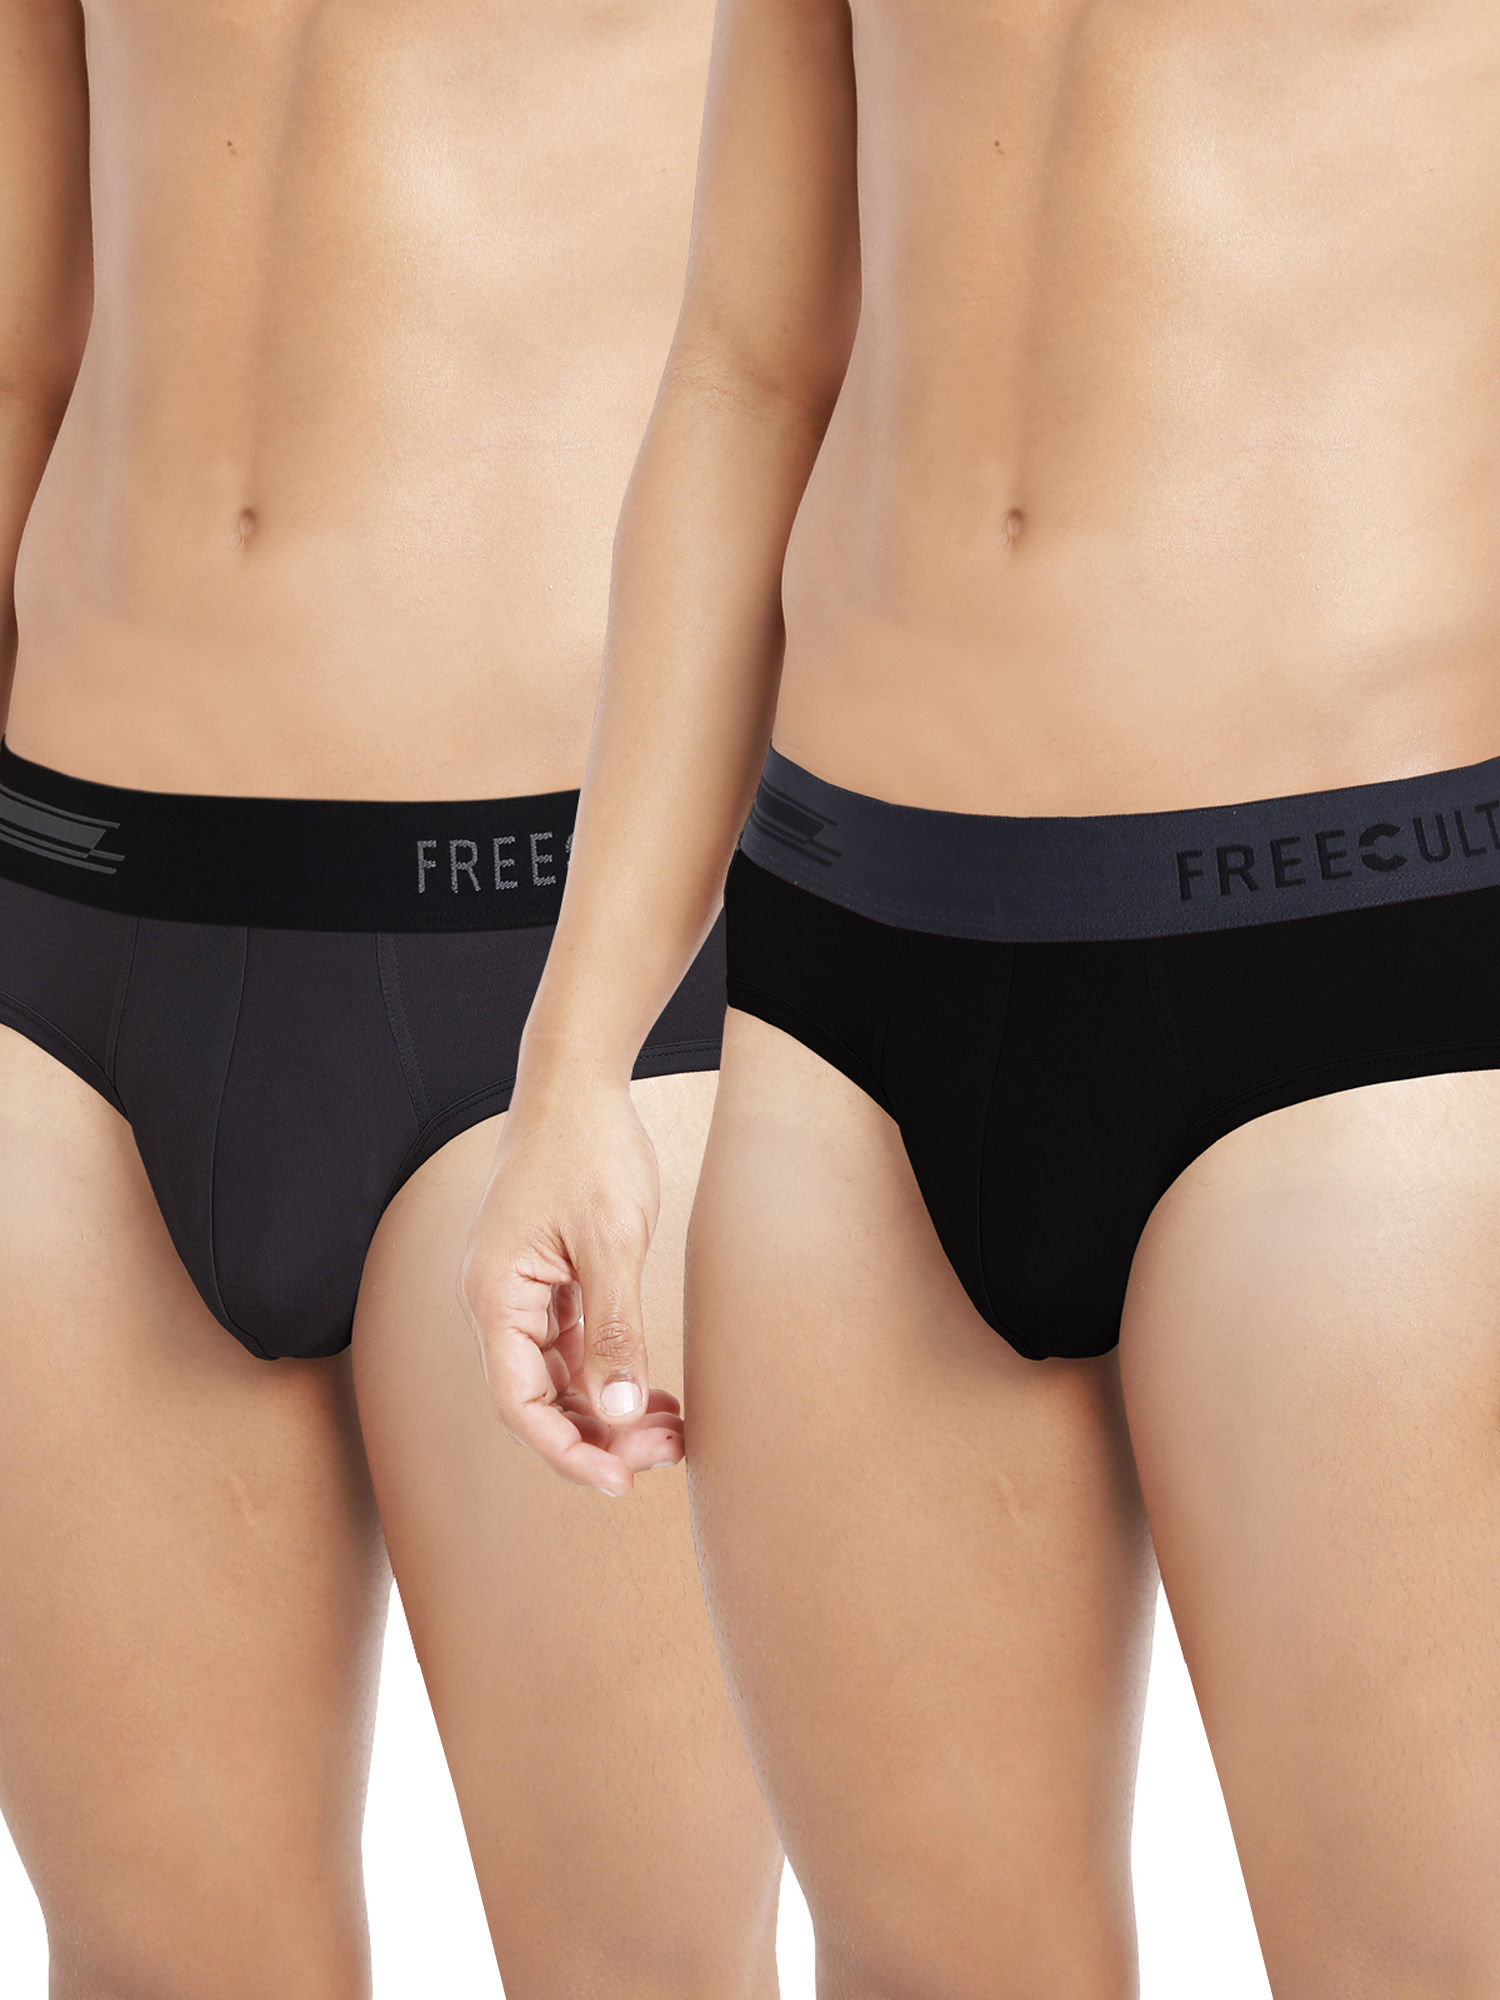 FREECULTR Anti-Microbial Air-Soft Micromodal Underwear Brief Pack Of 2 - Multi-Color (XL)